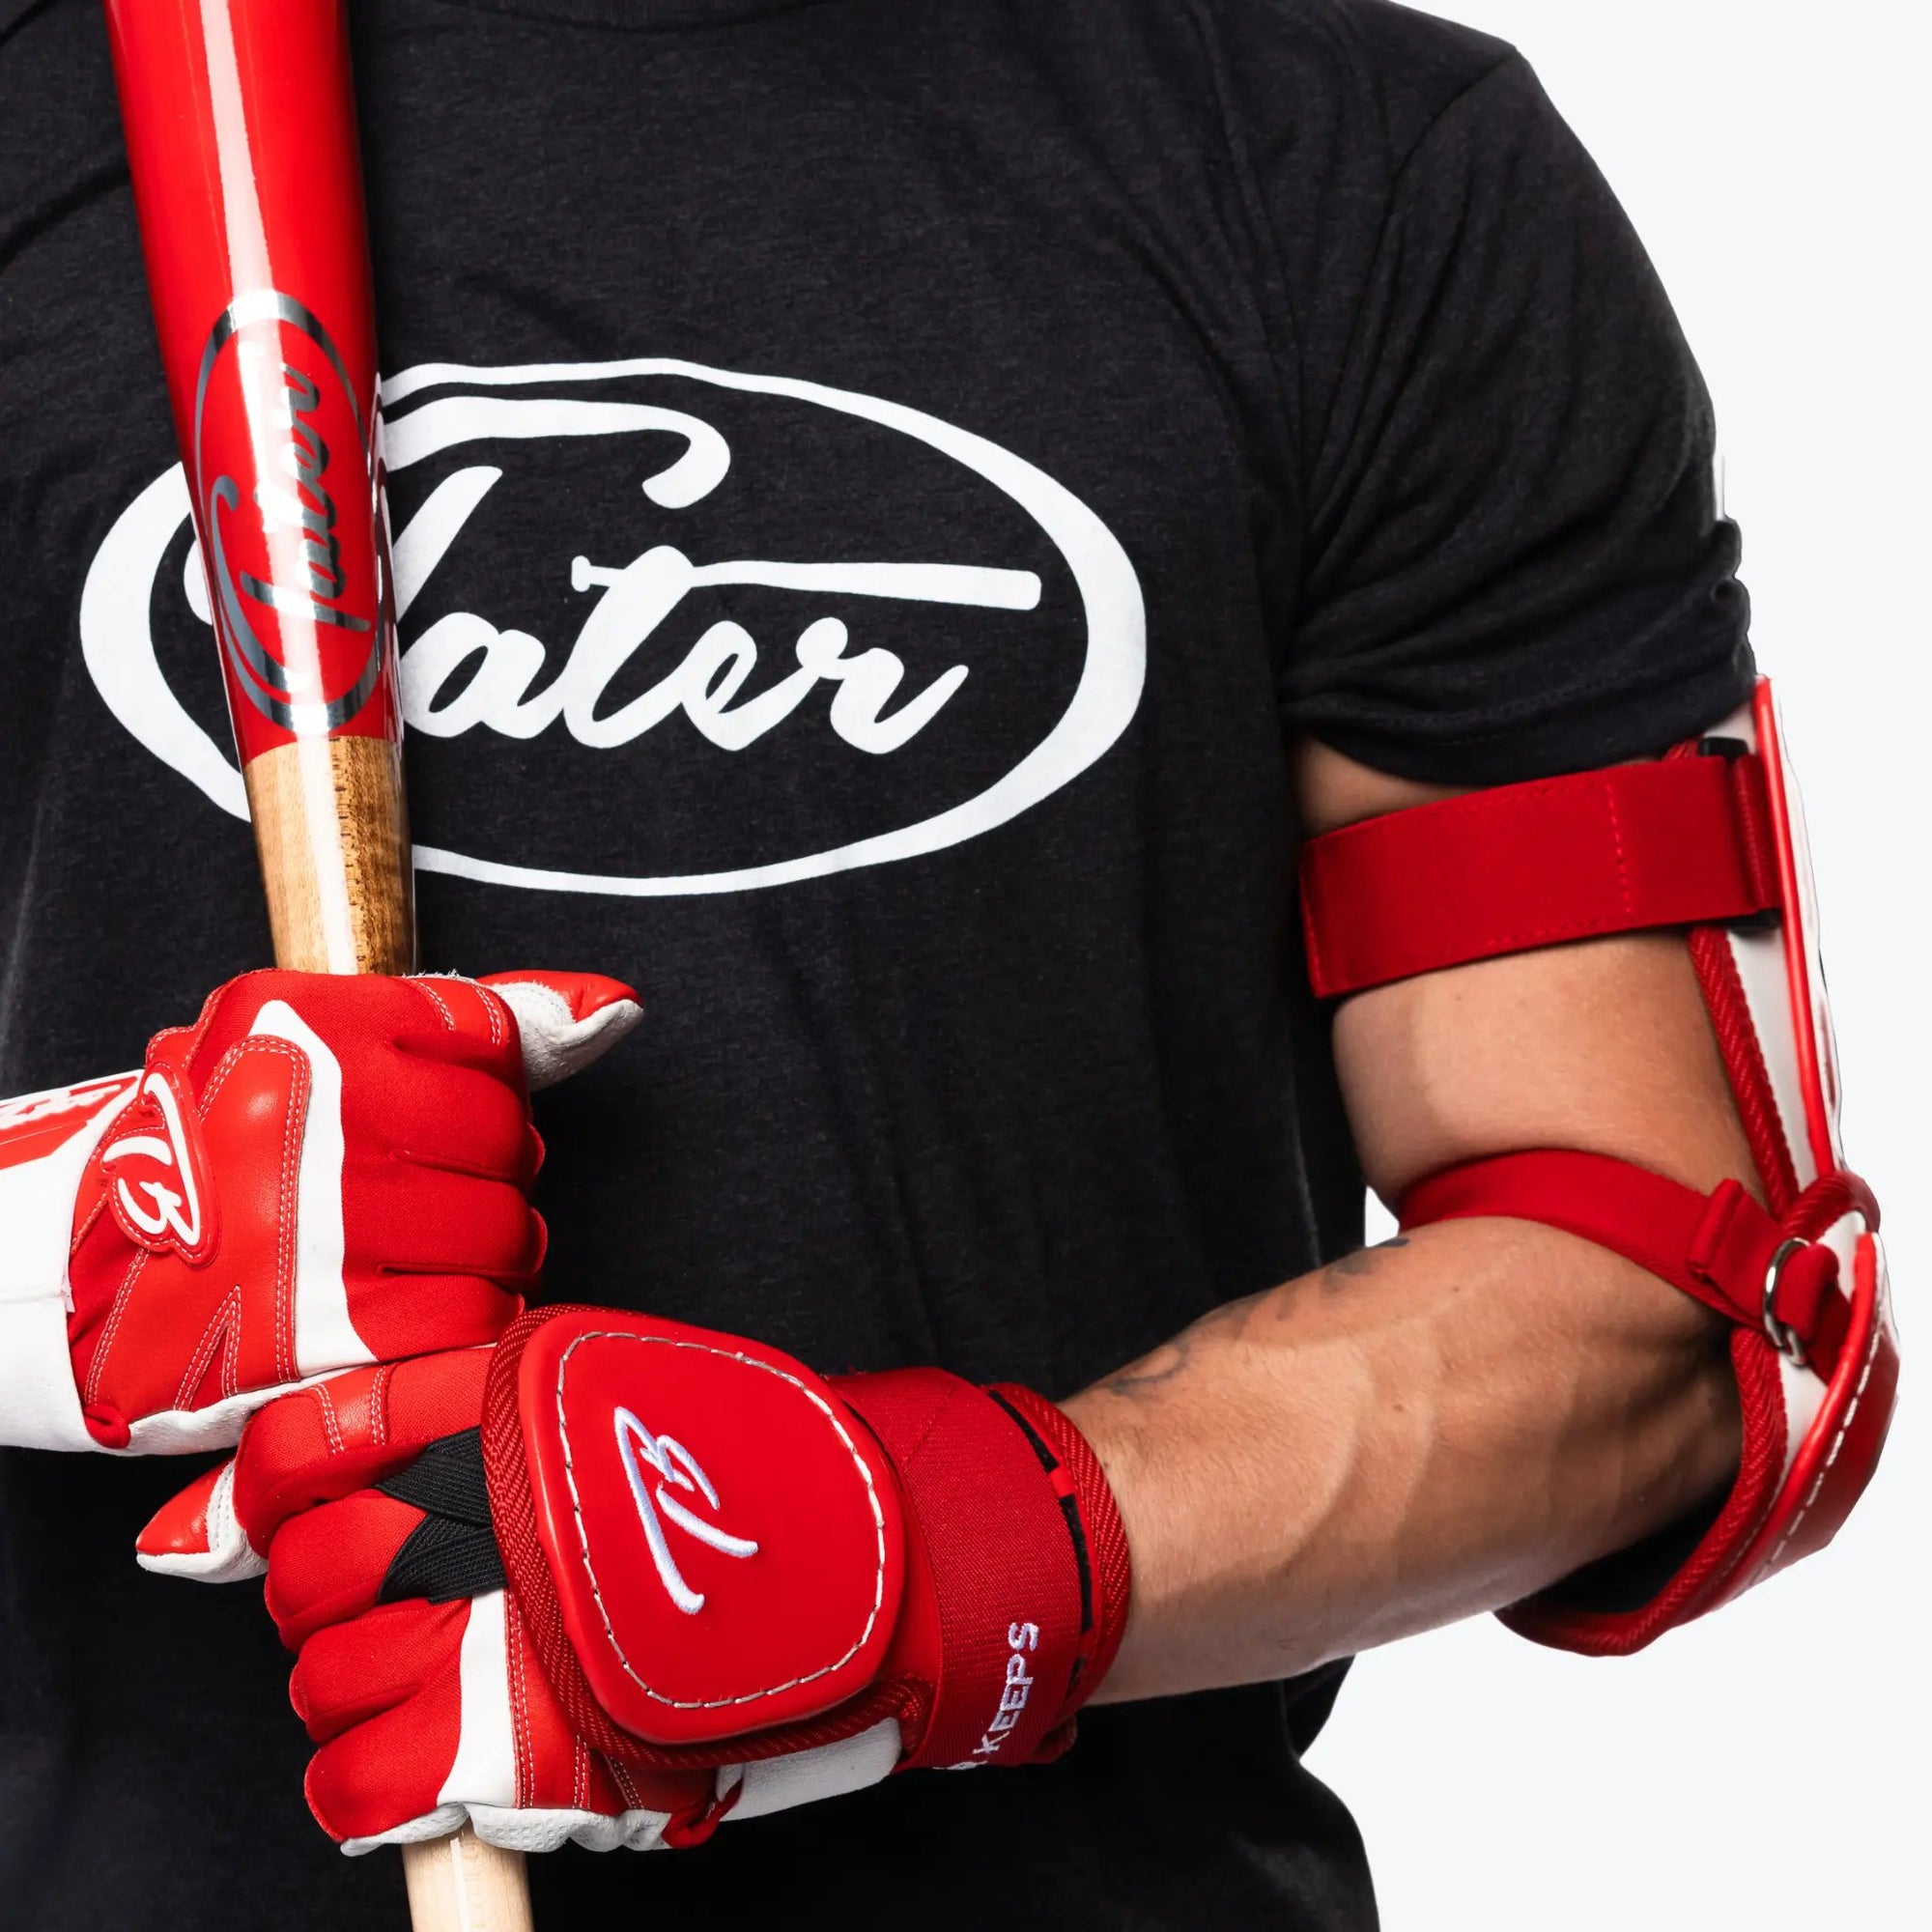 Image of a baseball player swinging a bat with focus on the elbow guard providing protection during the swing.